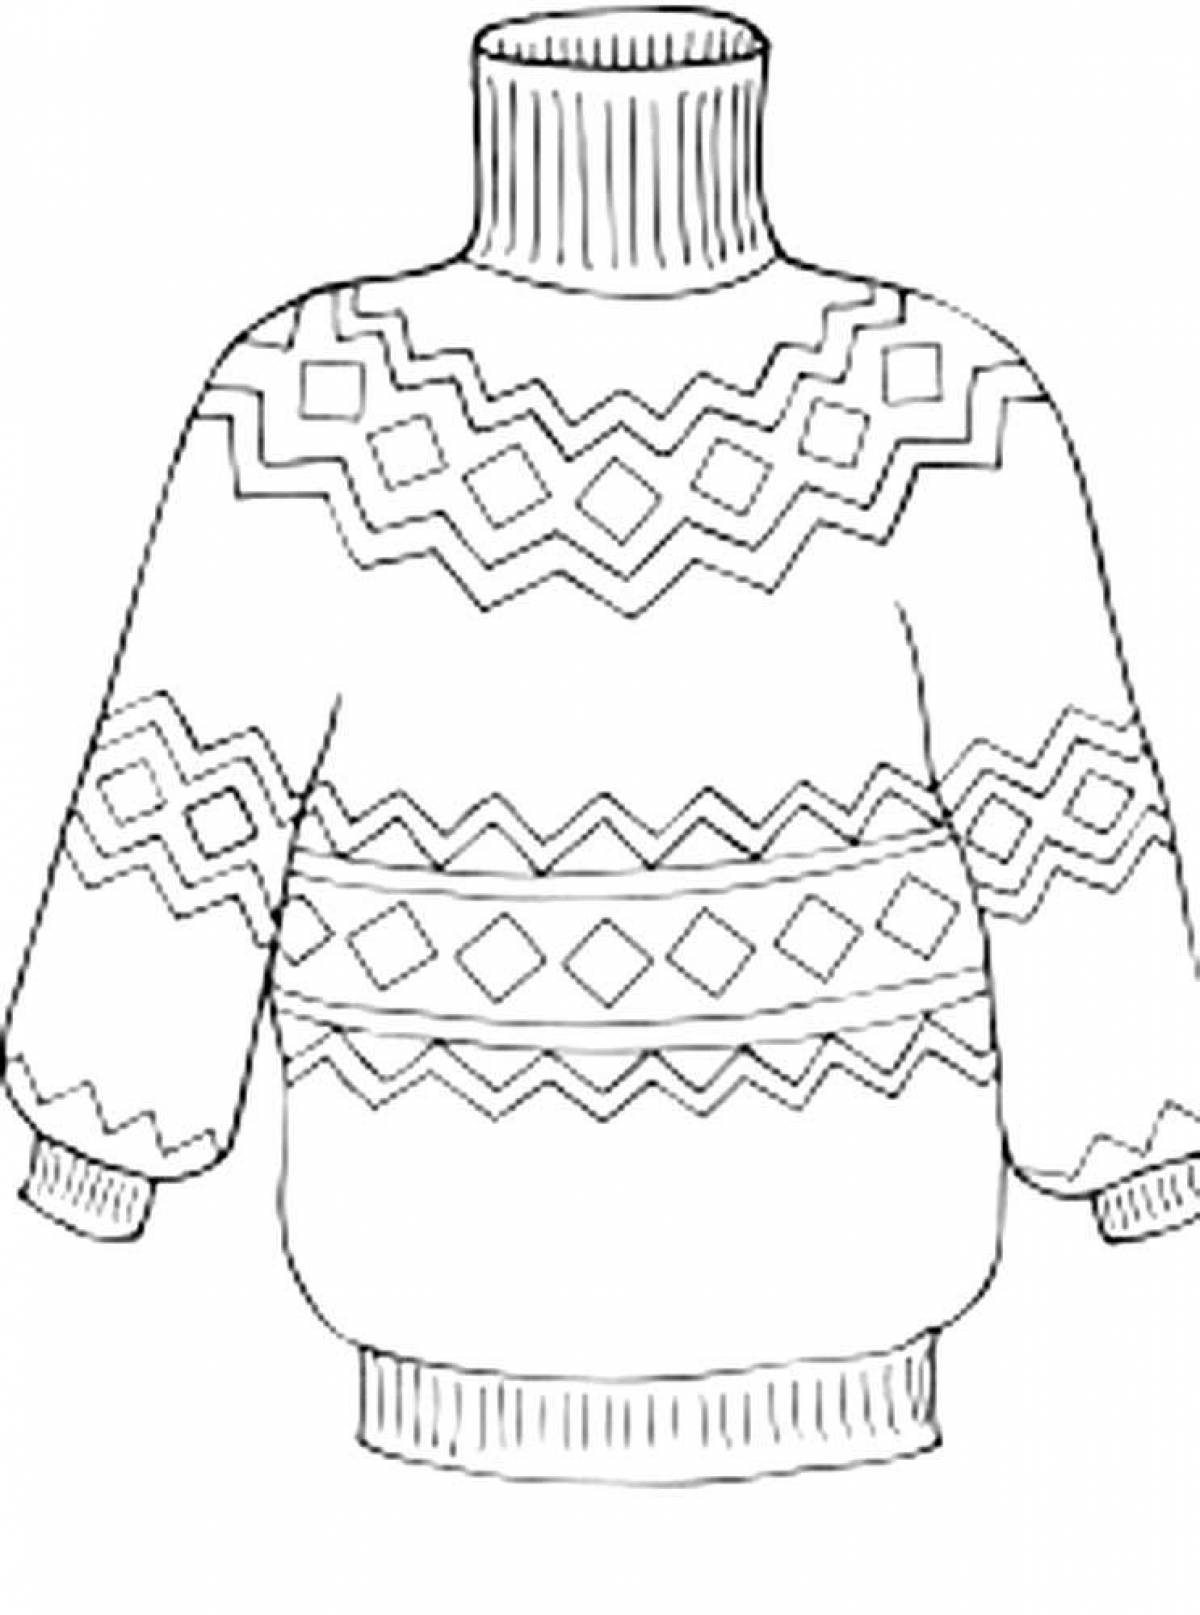 Animated sweater coloring page